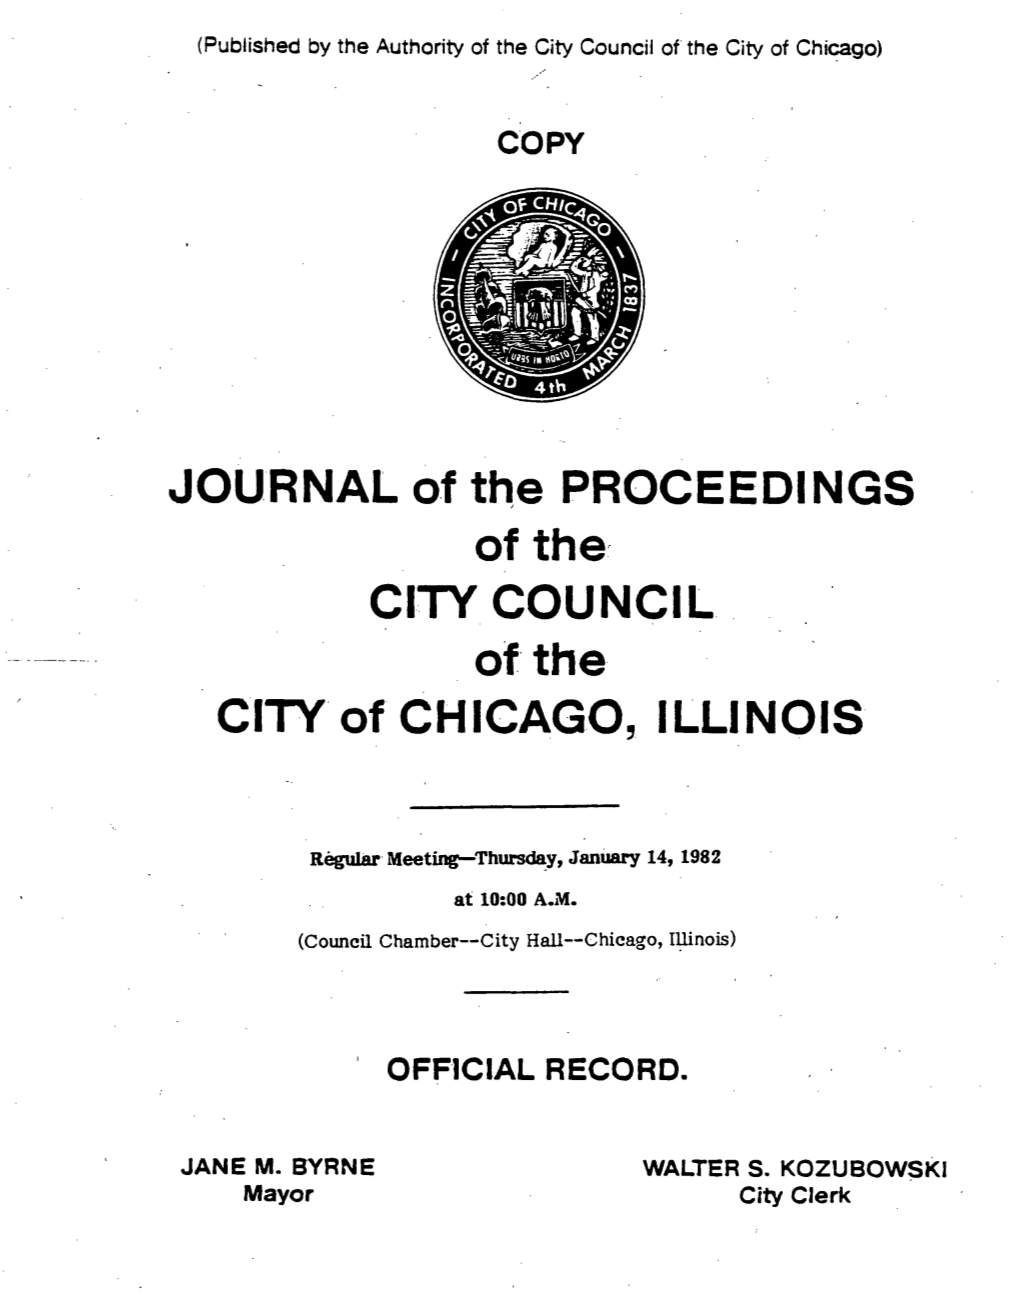 JOURNAL of the PROCEEDINGS of the CITY COUNCIL Ofthe Cityof CHICAGO, ILLINOIS